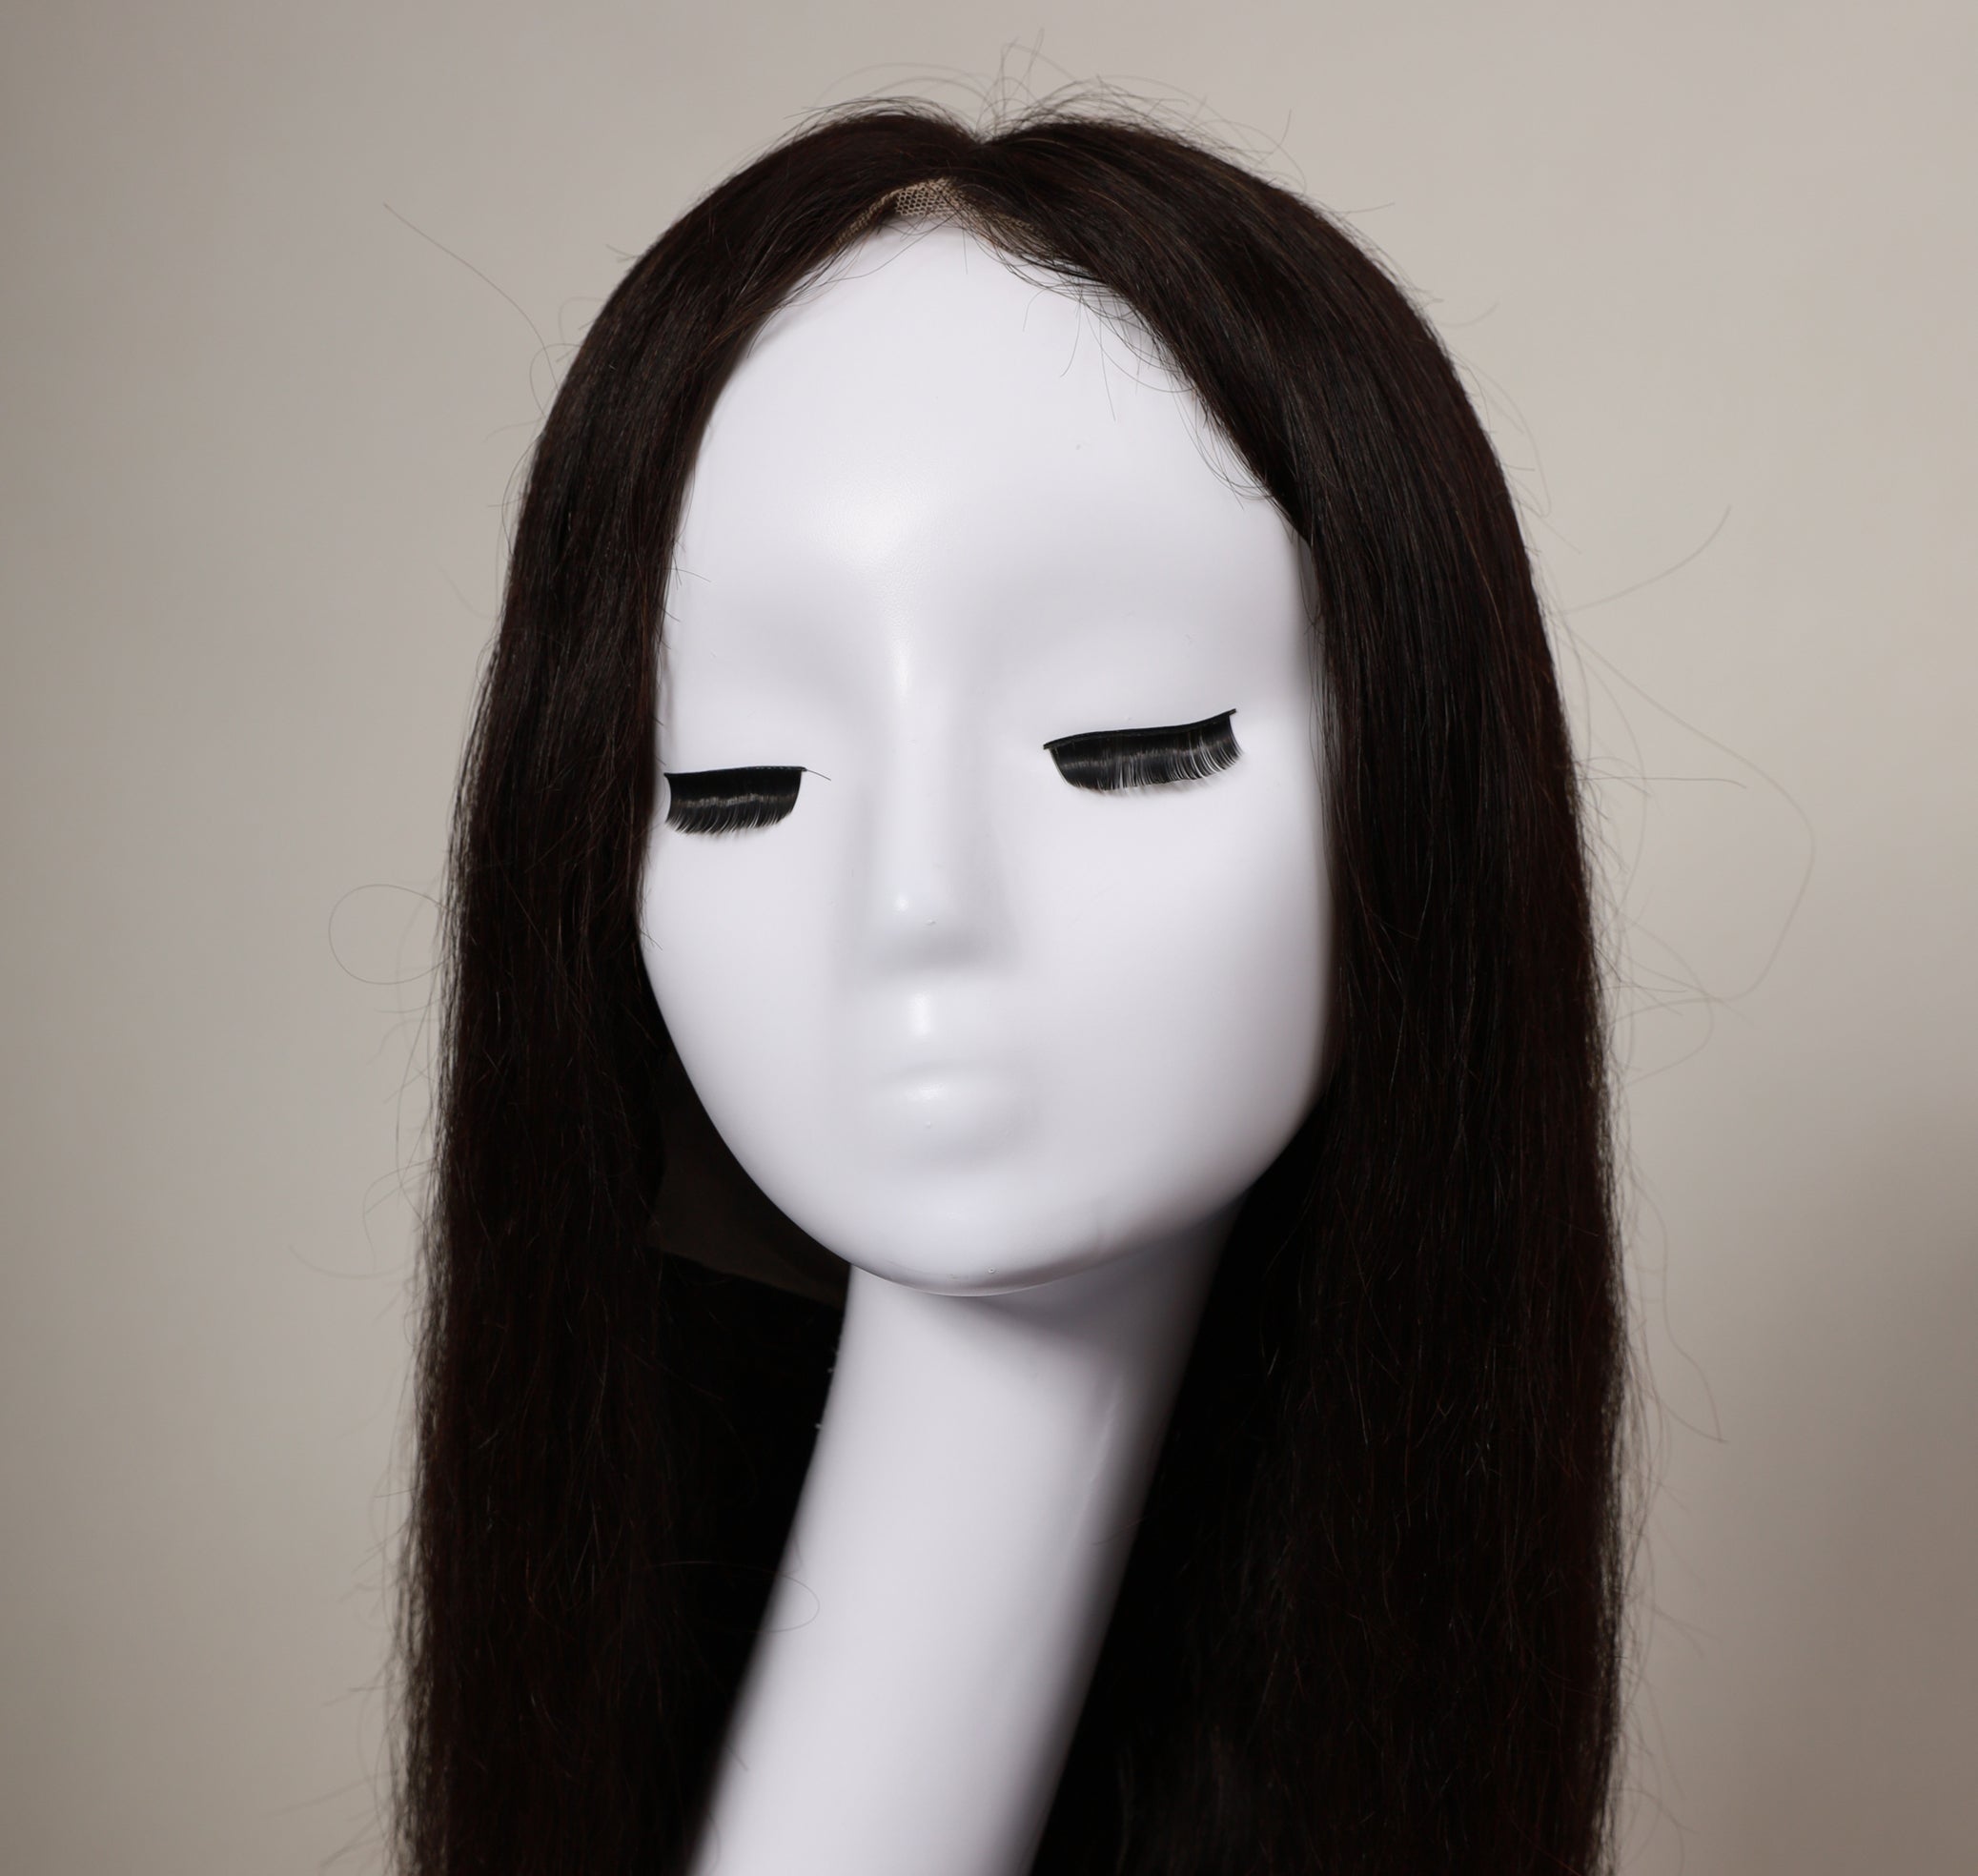 Genuine Hair Full Lace Wig Brunette Brown 16 - 22 Inches